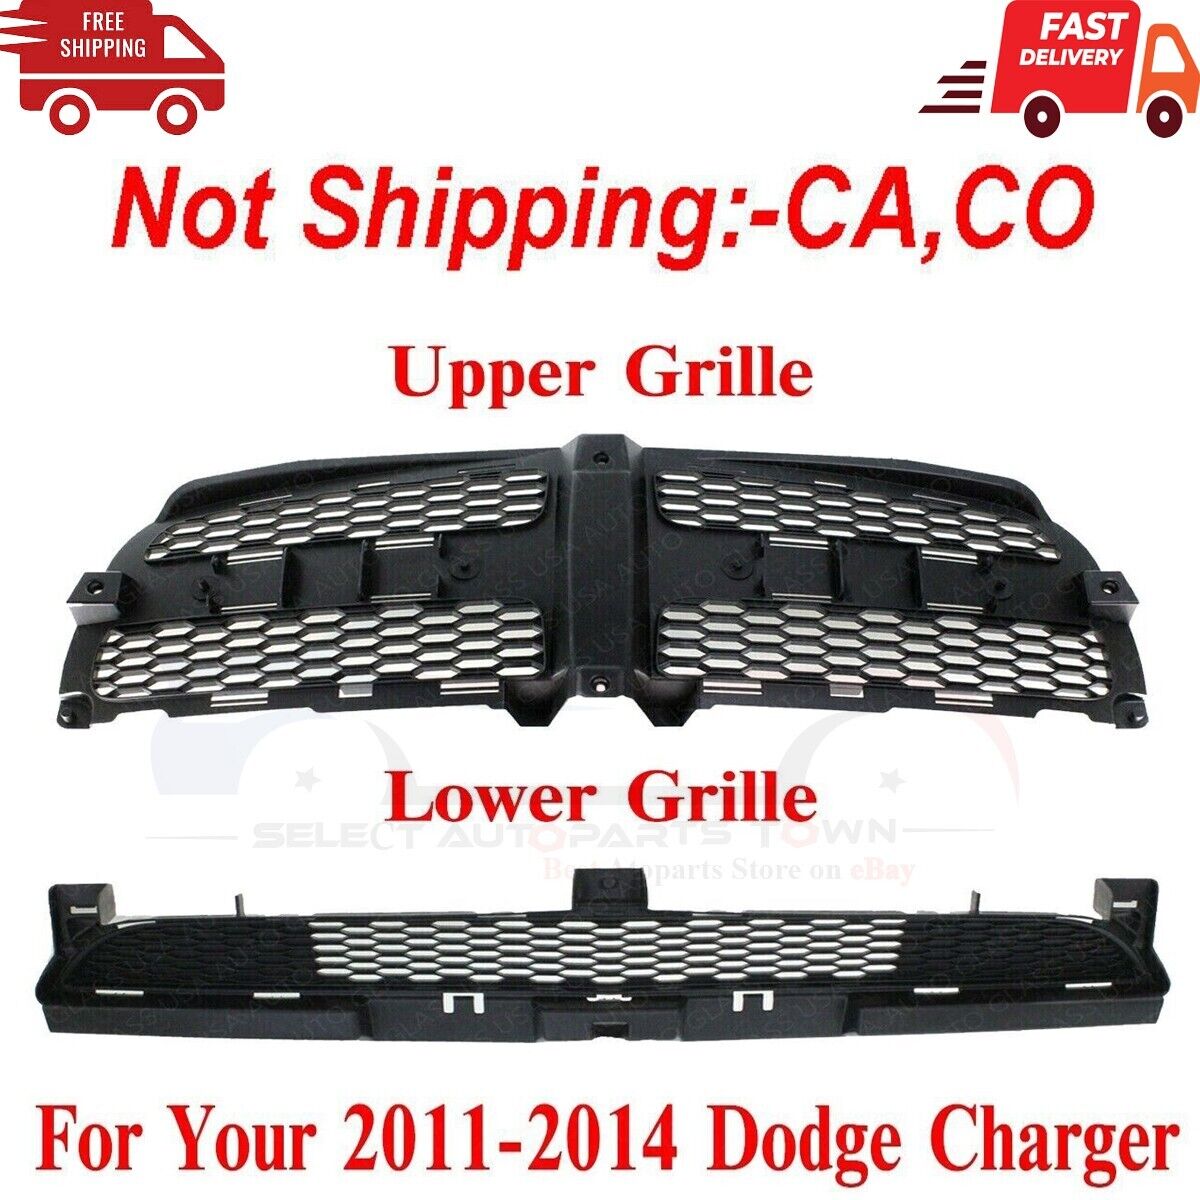 New Fits 11-14 Dodge Charger Front Upper & Lower Grille Textured Black Plastic